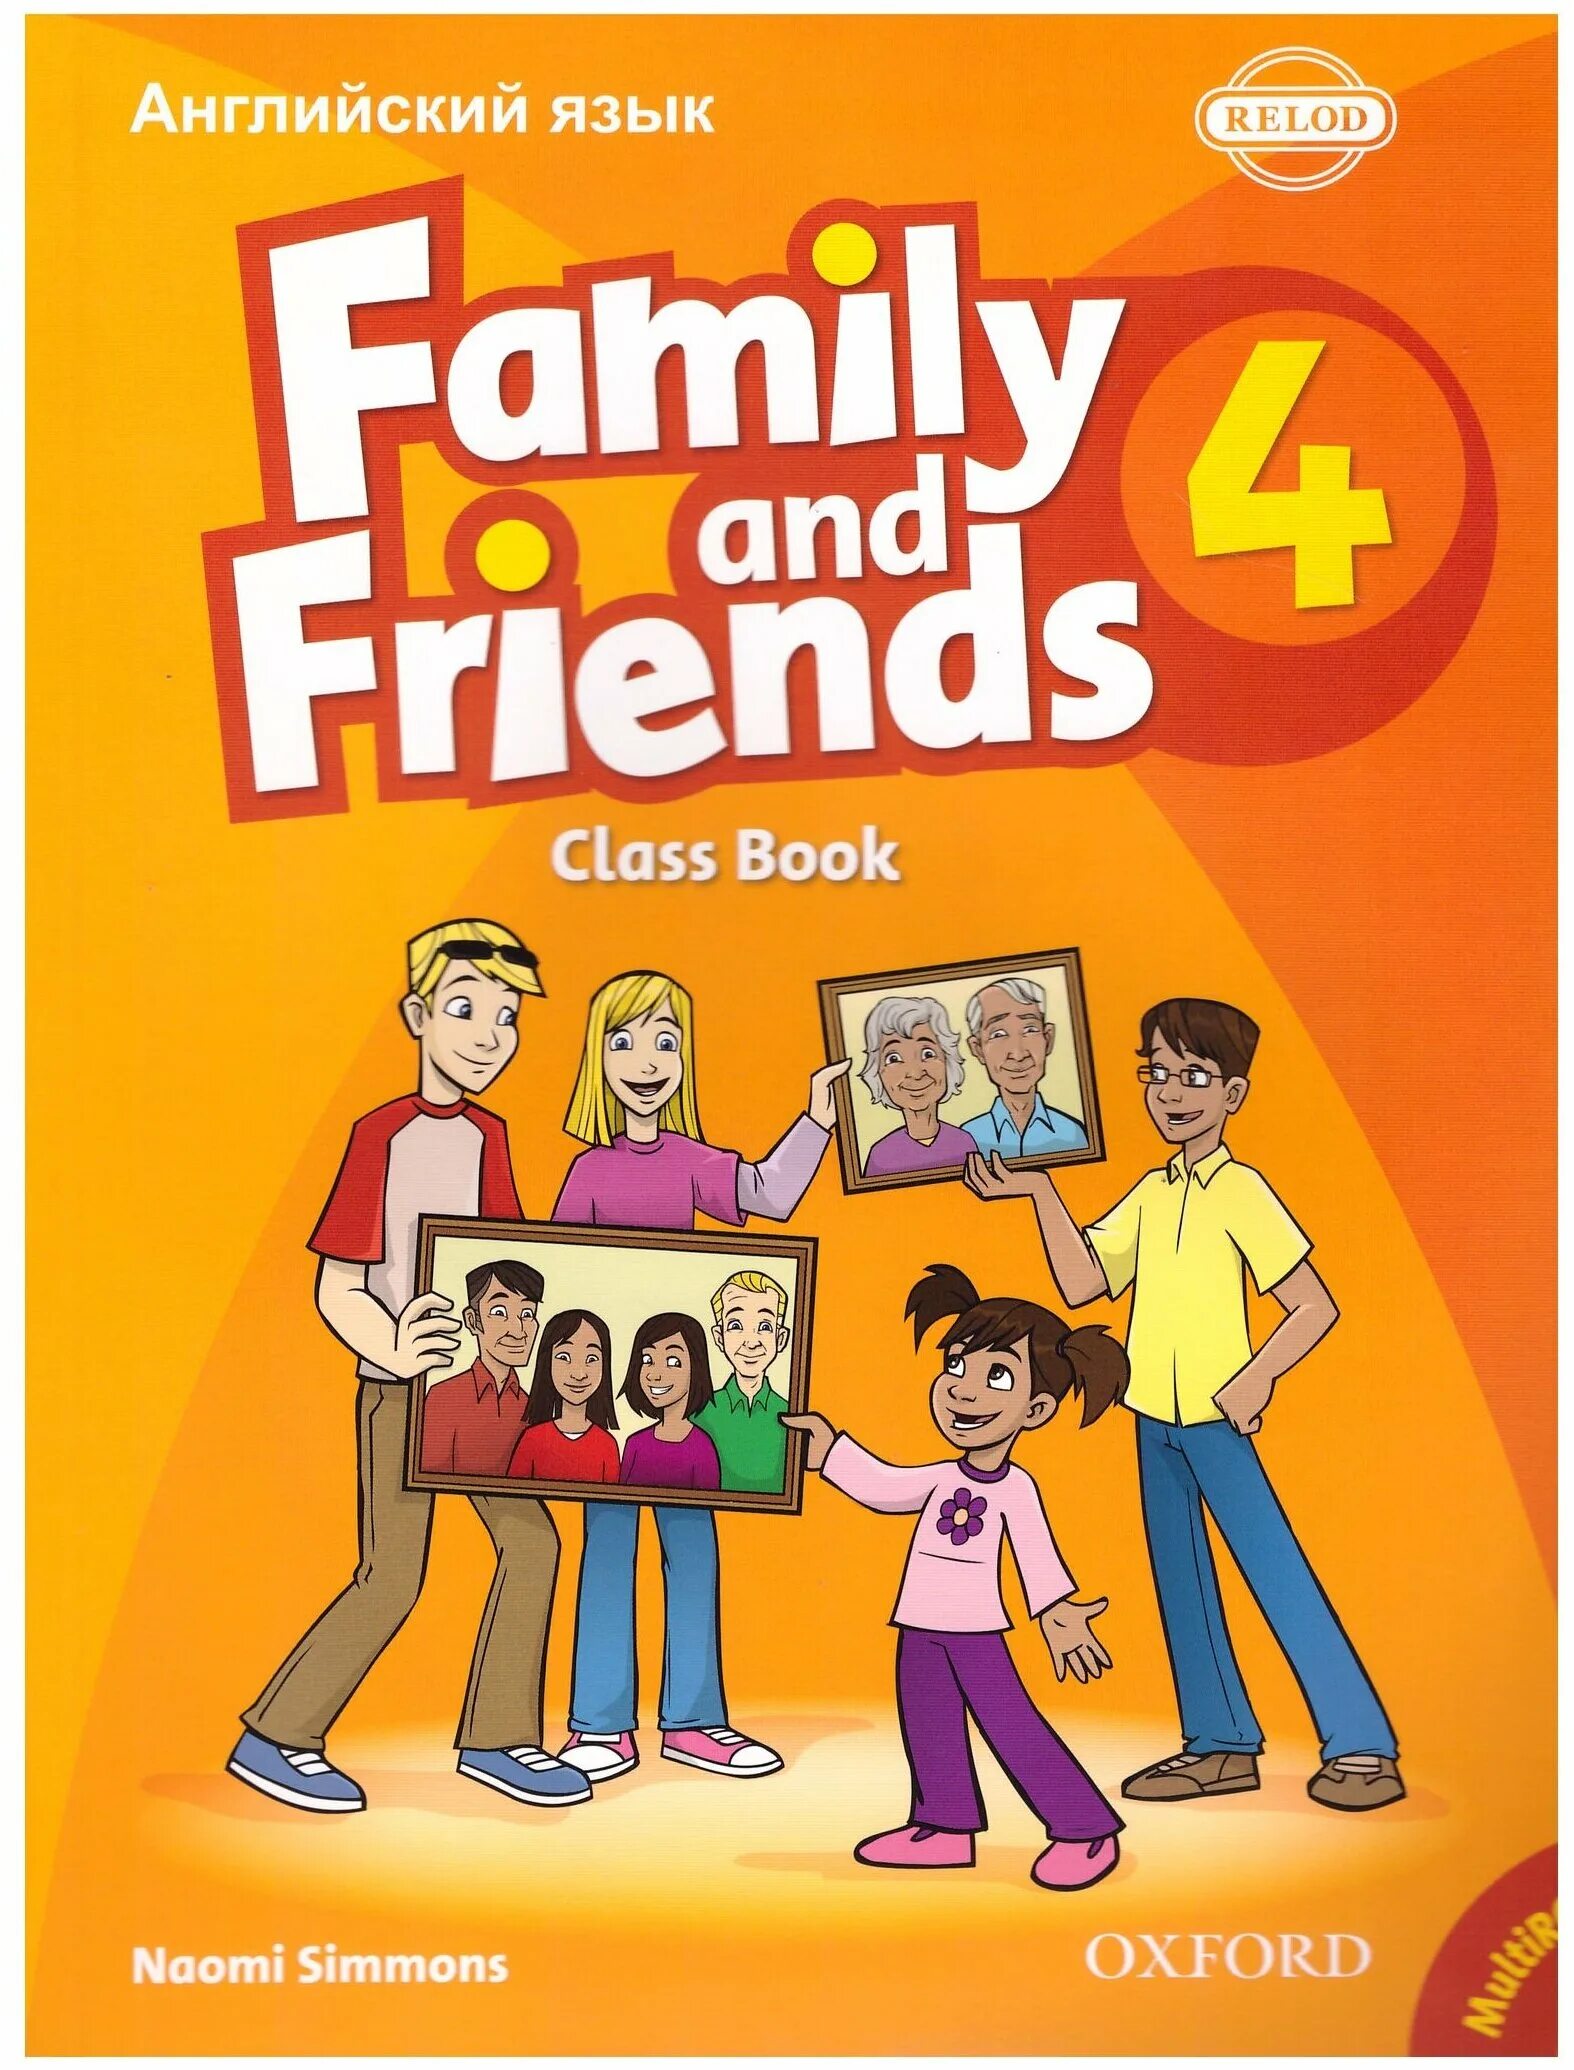 My class book. 4 Класс Family and friends 2 Classbook Workbook. Учебник по английскому языку Family and friends 4. Английский язык Family and friends class book 2. Учебник по английскому языку Family and friends 1.